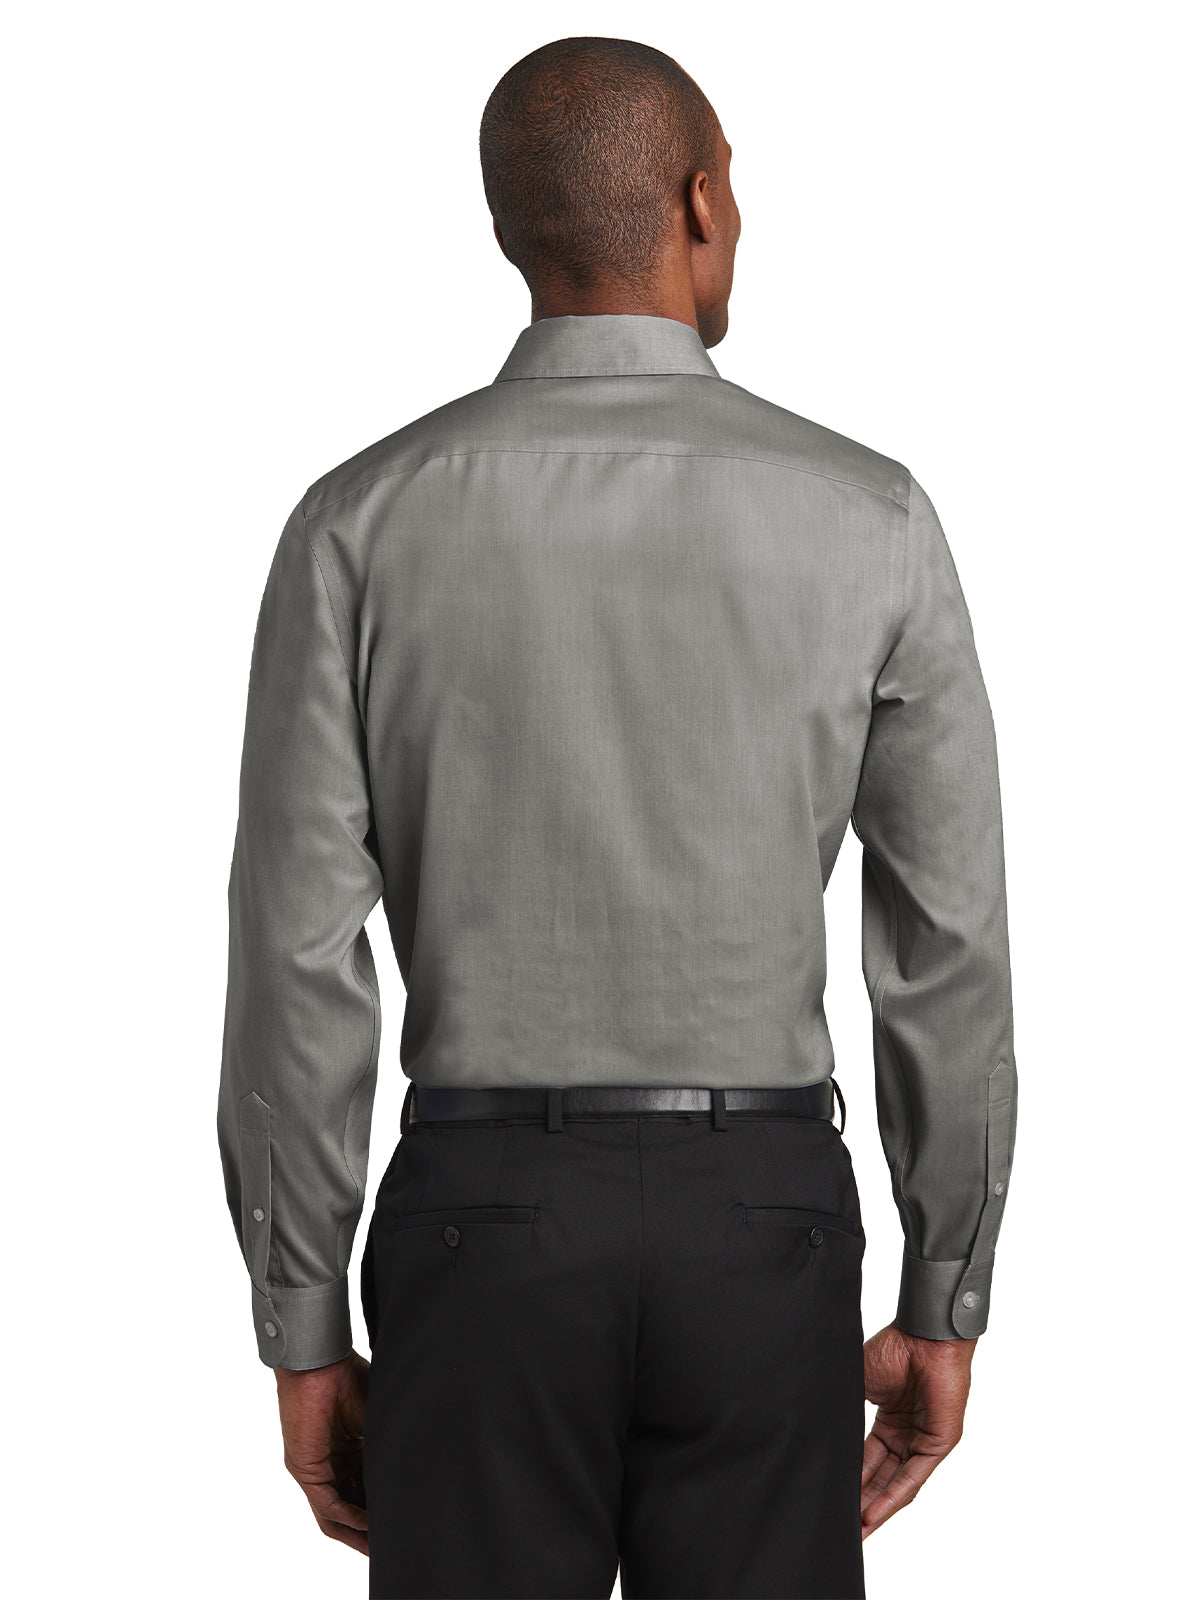 Slim Fit Pinpoint Oxford Non-Iron Shirt - RH620 - Charcoal